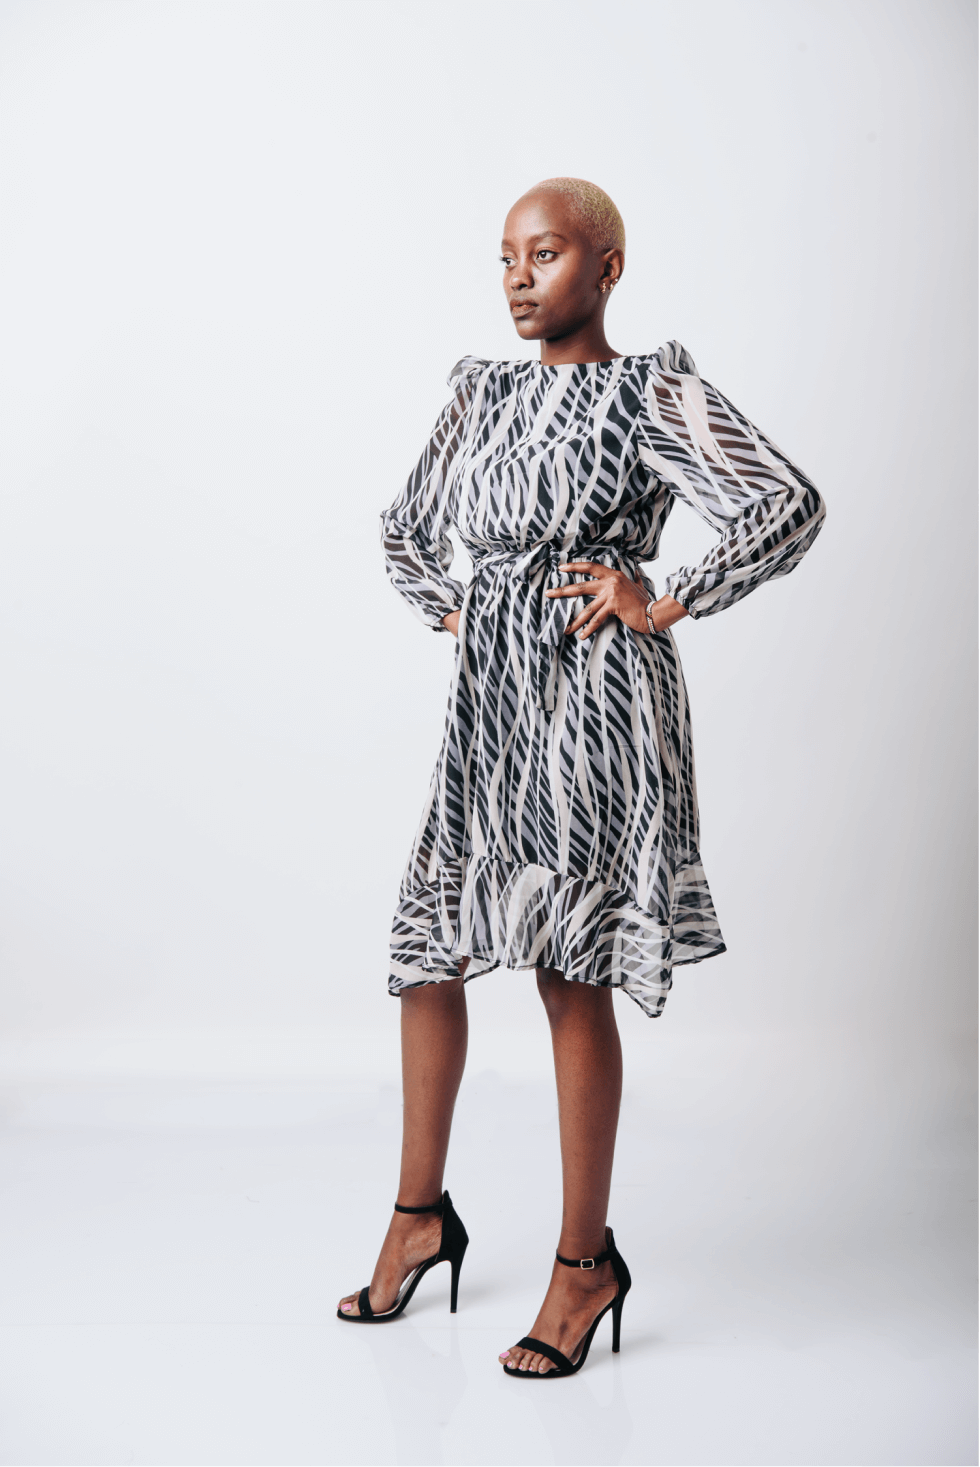 Shop Navy Printed A-line dress by The Fashion Frenzy on Arrai. Discover stylish, affordable clothing, jewelry, handbags and unique handmade pieces from top Kenyan & African fashion brands prioritising sustainability and quality craftsmanship.